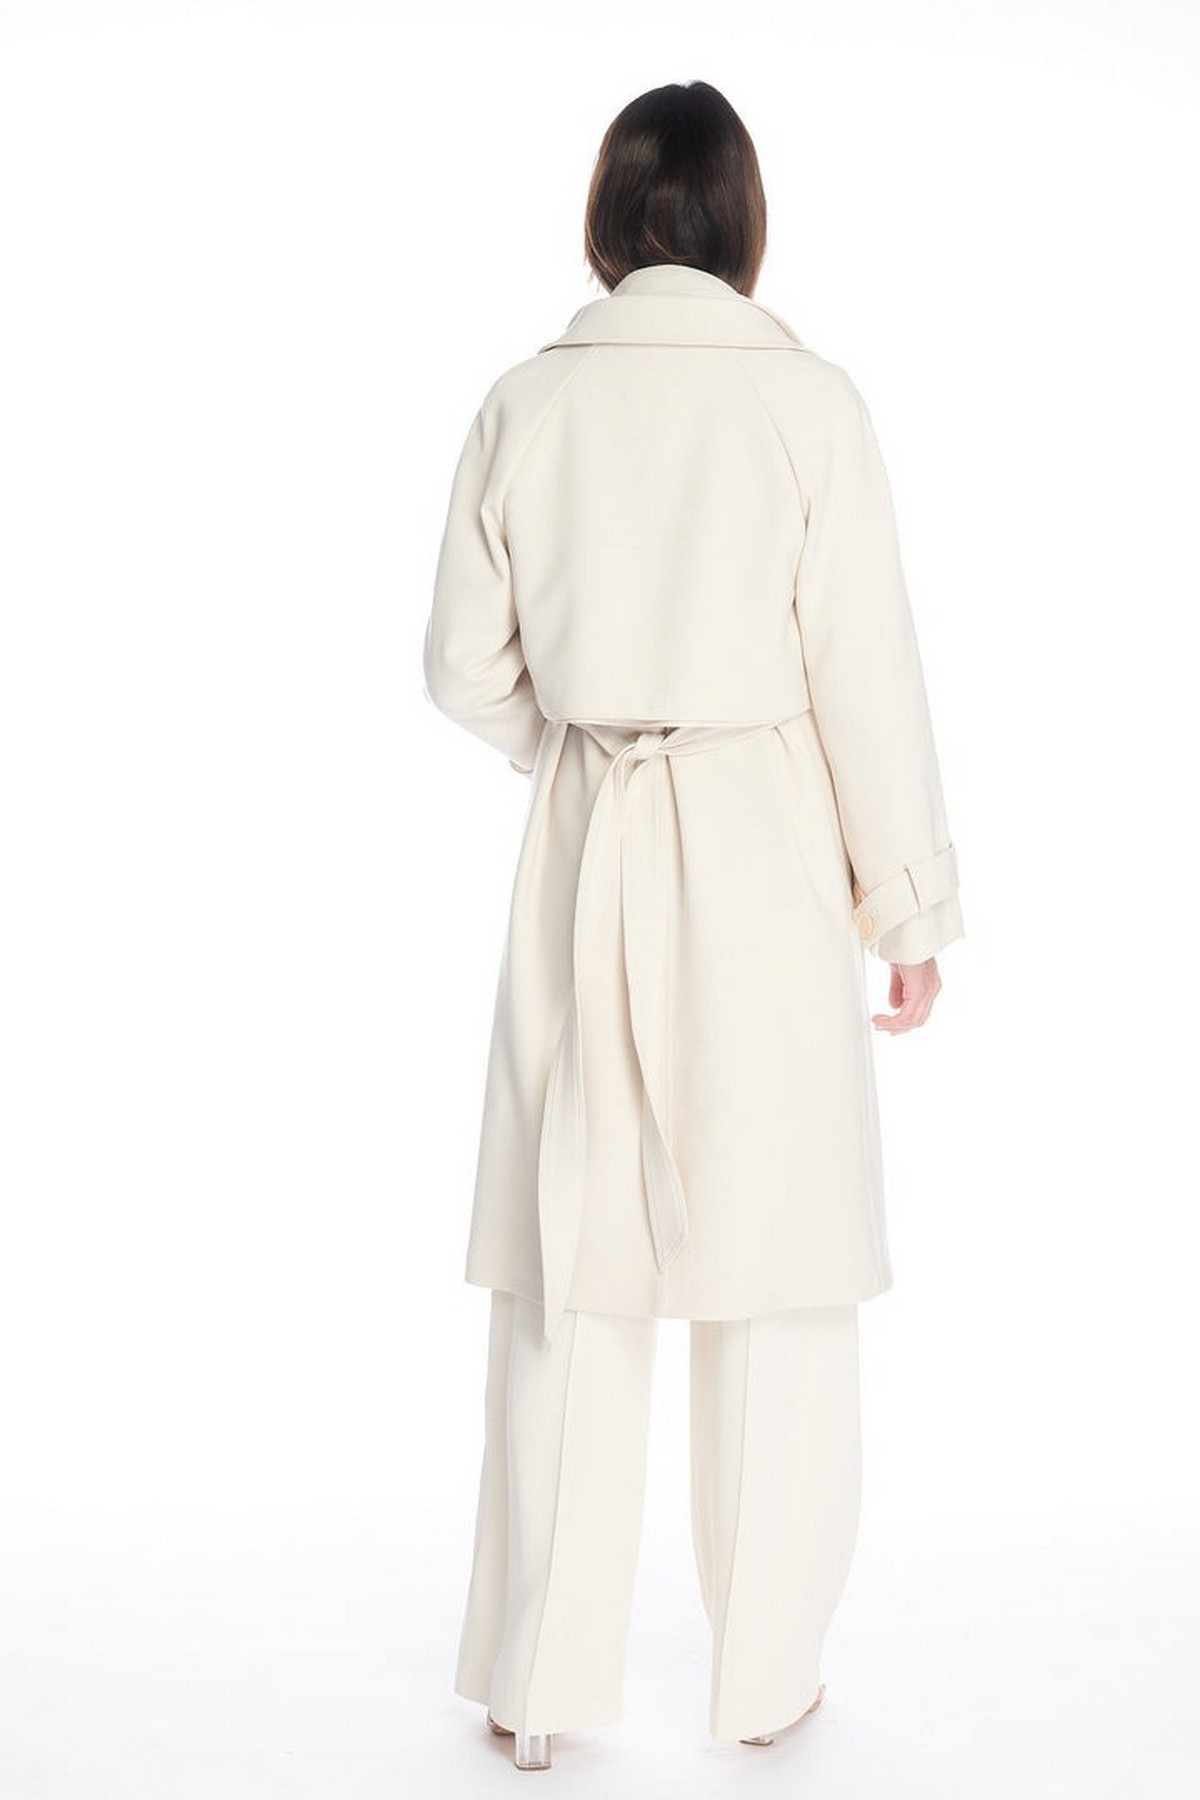 Oscar the collection - Odile coat - 3 in 1 coat sand - uitverkocht